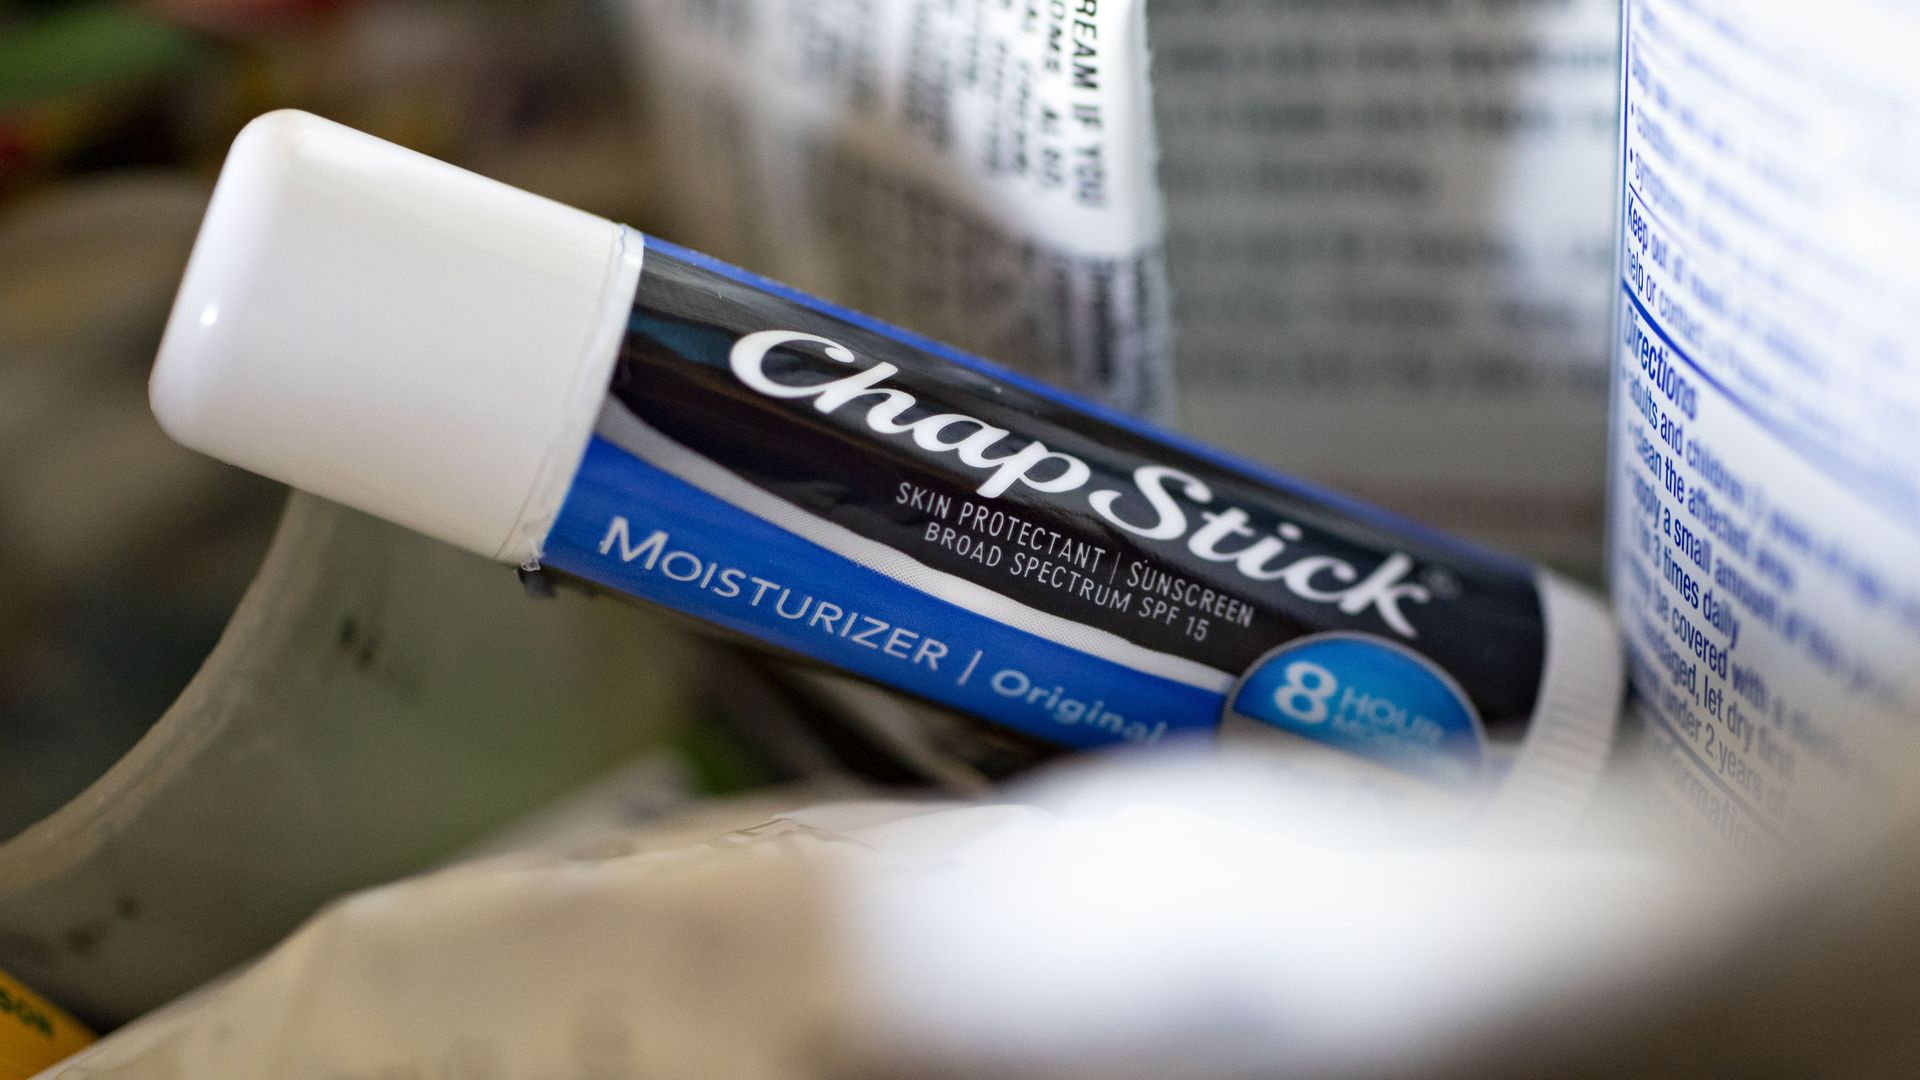 A tube of chapstick